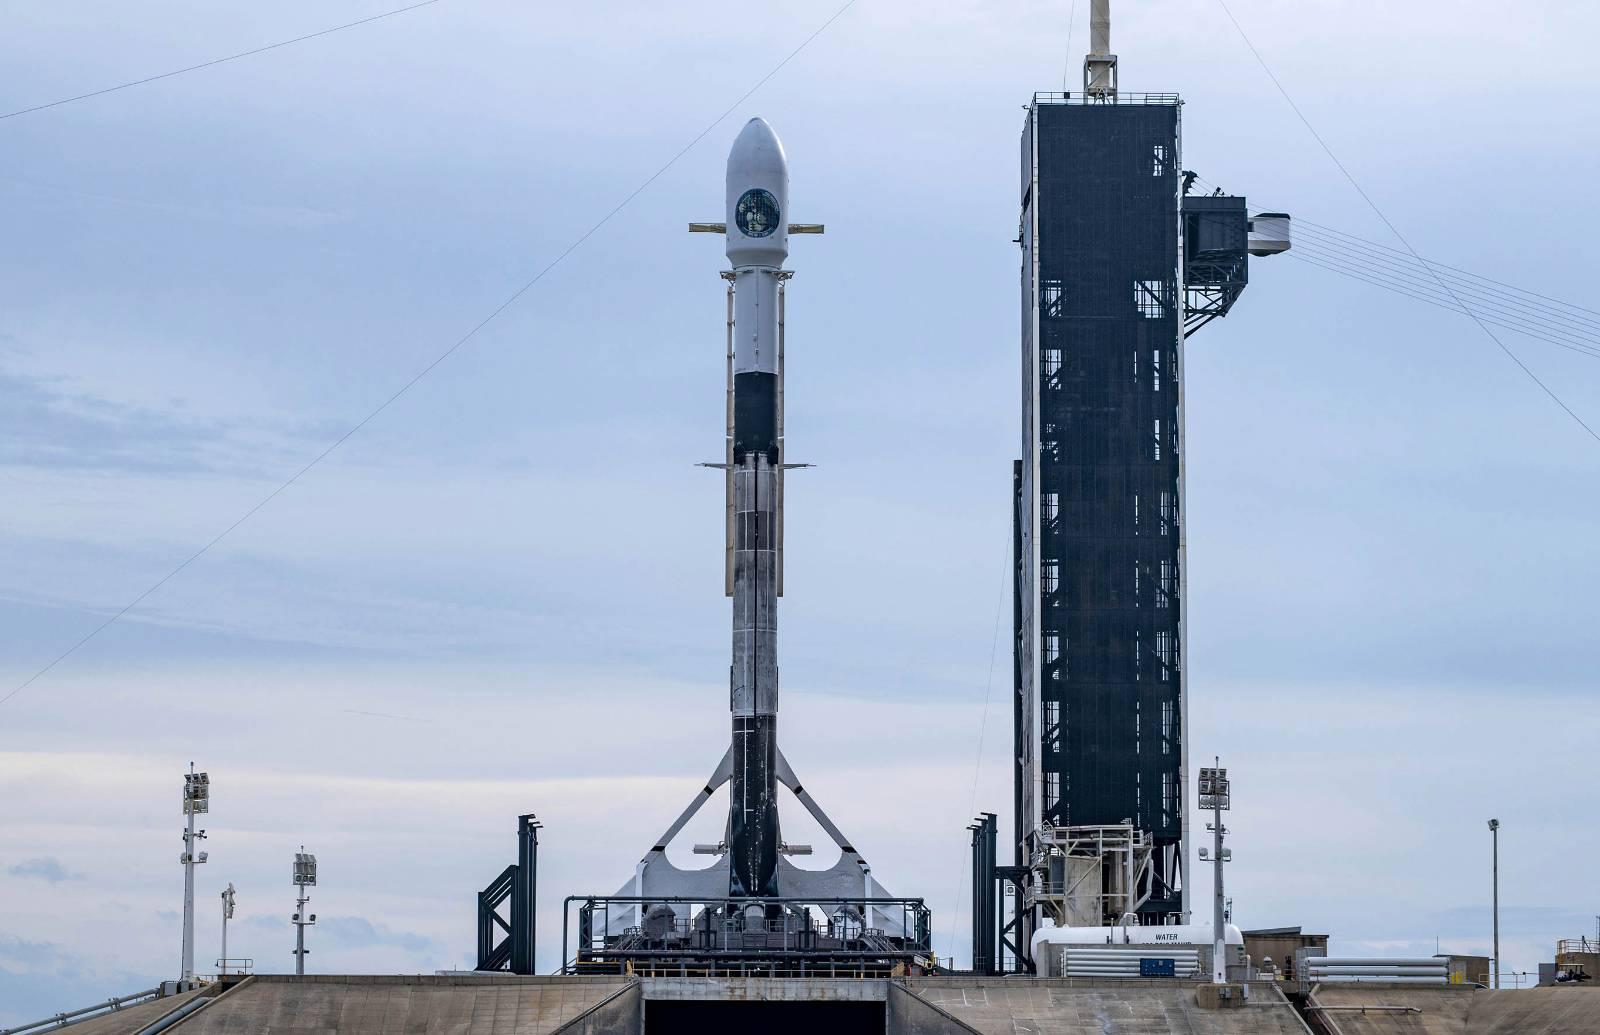 SpaceX just set a ridiculous record with its Falcon 9 rocket